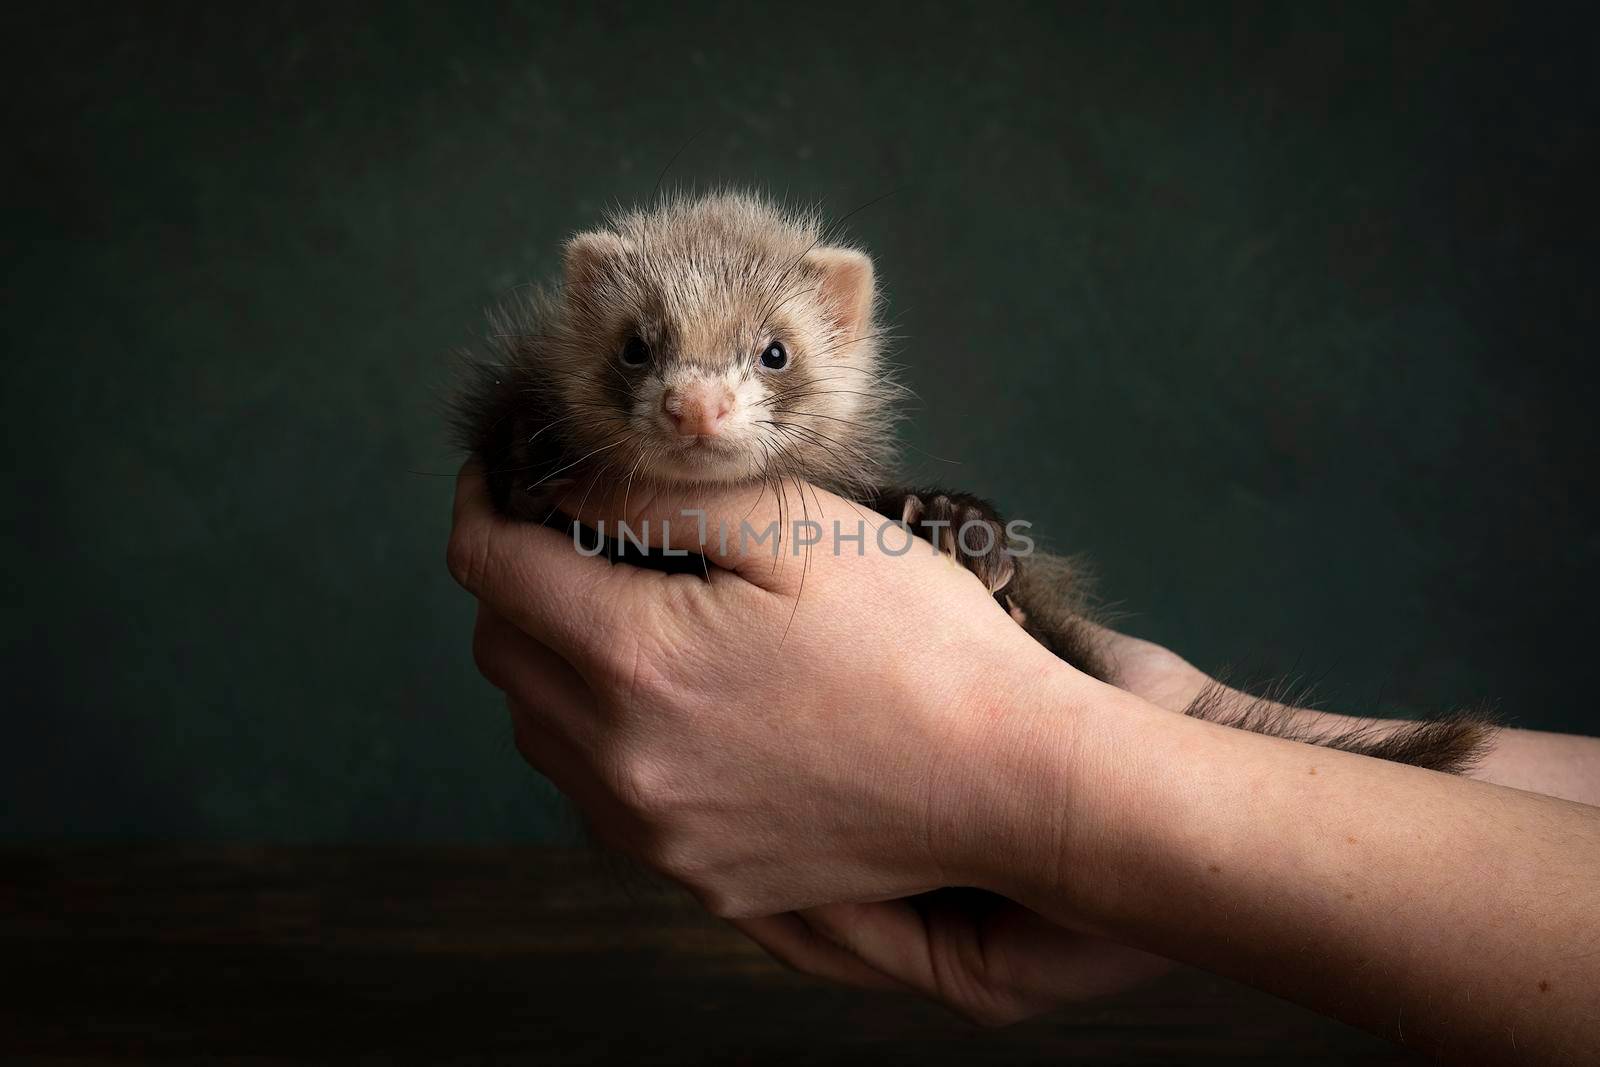 A young ferret or polecat puppy in a stillife scene held in hands by his owner against a green background by LeoniekvanderVliet